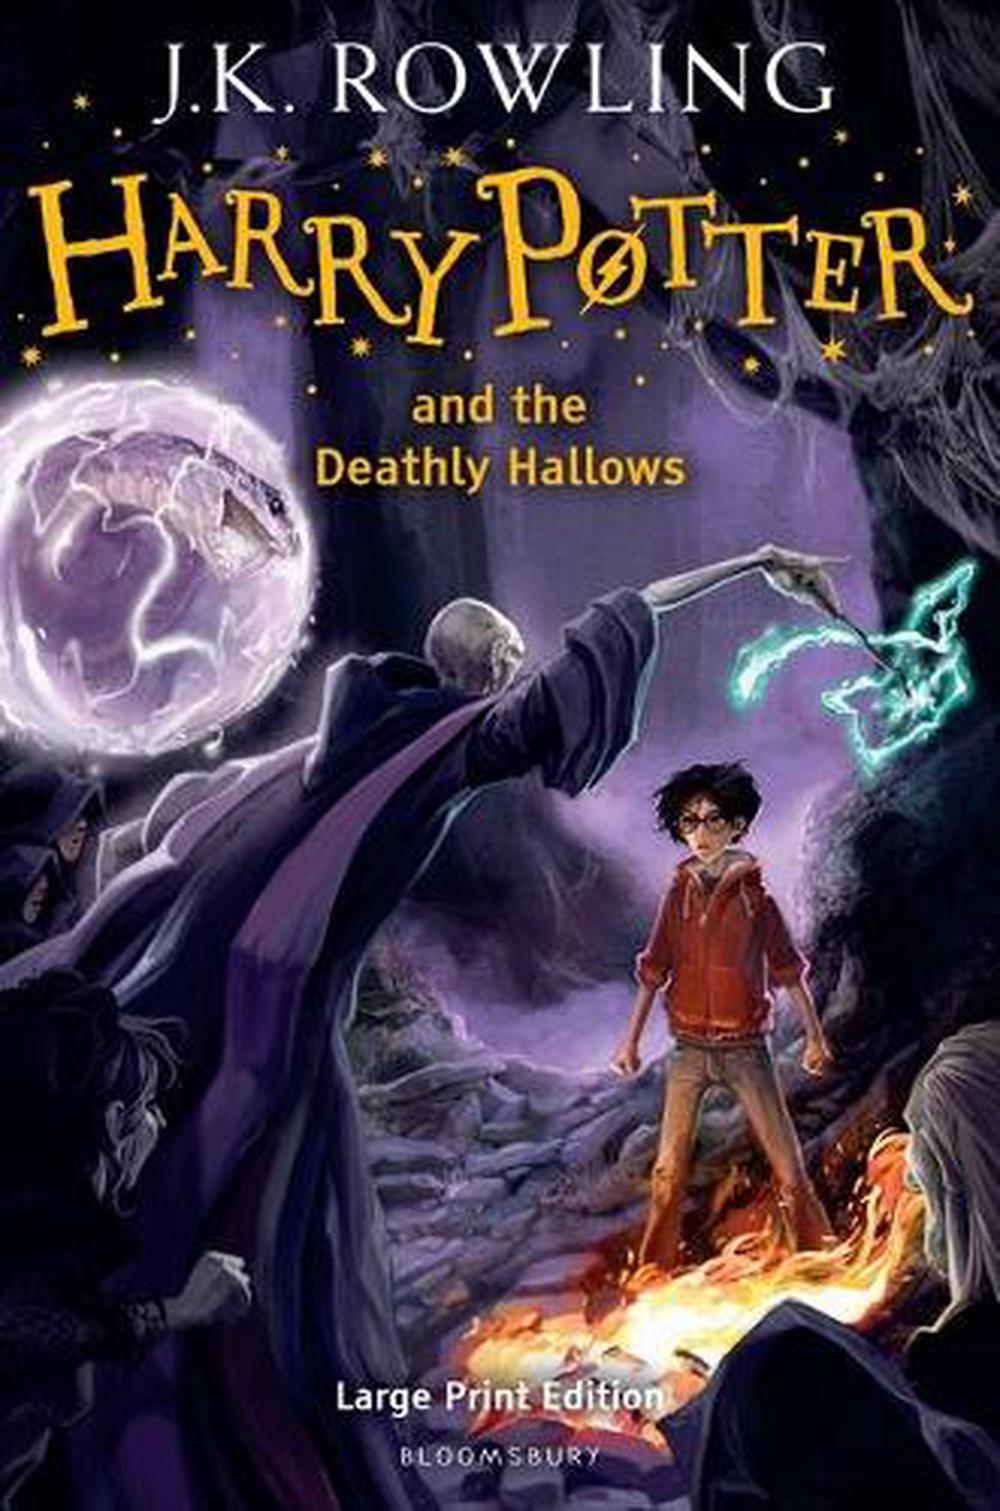 harry potter and the deathly hallows audiobook download